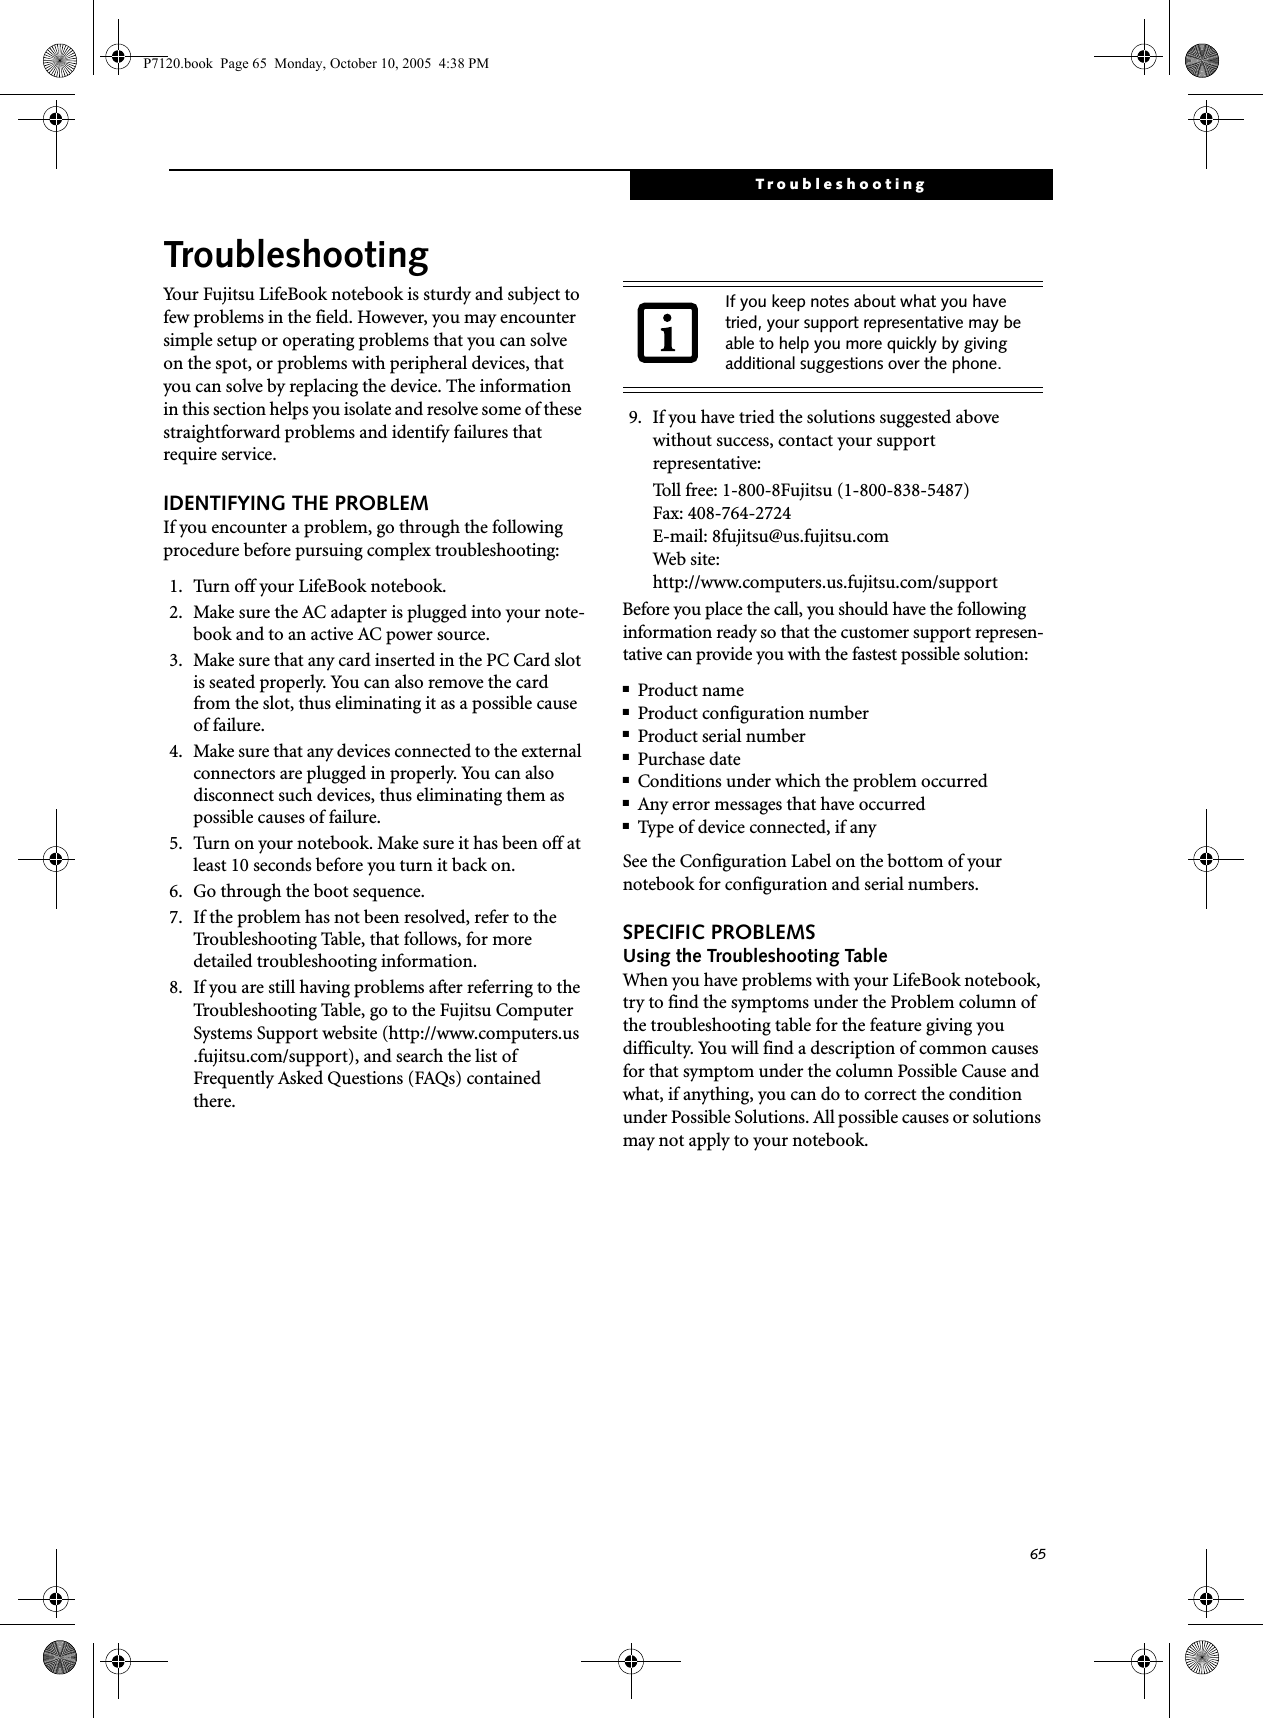 65TroubleshootingTroubleshootingYour Fujitsu LifeBook notebook is sturdy and subject to few problems in the field. However, you may encounter simple setup or operating problems that you can solve on the spot, or problems with peripheral devices, that you can solve by replacing the device. The information in this section helps you isolate and resolve some of these straightforward problems and identify failures that require service.IDENTIFYING THE PROBLEMIf you encounter a problem, go through the following procedure before pursuing complex troubleshooting:1. Turn off your LifeBook notebook.2. Make sure the AC adapter is plugged into your note-book and to an active AC power source.3. Make sure that any card inserted in the PC Card slot is seated properly. You can also remove the card from the slot, thus eliminating it as a possible cause of failure.4. Make sure that any devices connected to the external connectors are plugged in properly. You can also disconnect such devices, thus eliminating them as possible causes of failure.5. Turn on your notebook. Make sure it has been off at least 10 seconds before you turn it back on.6. Go through the boot sequence.7. If the problem has not been resolved, refer to the Troubleshooting Table, that follows, for more detailed troubleshooting information. 8. If you are still having problems after referring to the Troubleshooting Table, go to the Fujitsu Computer Systems Support website (http://www.computers.us.fujitsu.com/support), and search the list of Frequently Asked Questions (FAQs) contained there. 9. If you have tried the solutions suggested above without success, contact your support representative: Toll free: 1-800-8Fujitsu (1-800-838-5487) Fax: 408-764-2724 E-mail: 8fujitsu@us.fujitsu.com Web site: http://www.computers.us.fujitsu.com/supportBefore you place the call, you should have the following information ready so that the customer support represen-tative can provide you with the fastest possible solution:■Product name■Product configuration number■Product serial number■Purchase date■Conditions under which the problem occurred■Any error messages that have occurred■Type of device connected, if anySee the Configuration Label on the bottom of yournotebook for configuration and serial numbers.SPECIFIC PROBLEMSUsing the Troubleshooting TableWhen you have problems with your LifeBook notebook, try to find the symptoms under the Problem column of the troubleshooting table for the feature giving you difficulty. You will find a description of common causes for that symptom under the column Possible Cause and what, if anything, you can do to correct the condition under Possible Solutions. All possible causes or solutions may not apply to your notebook.If you keep notes about what you have tried, your support representative may be able to help you more quickly by giving additional suggestions over the phone.P7120.book  Page 65  Monday, October 10, 2005  4:38 PM